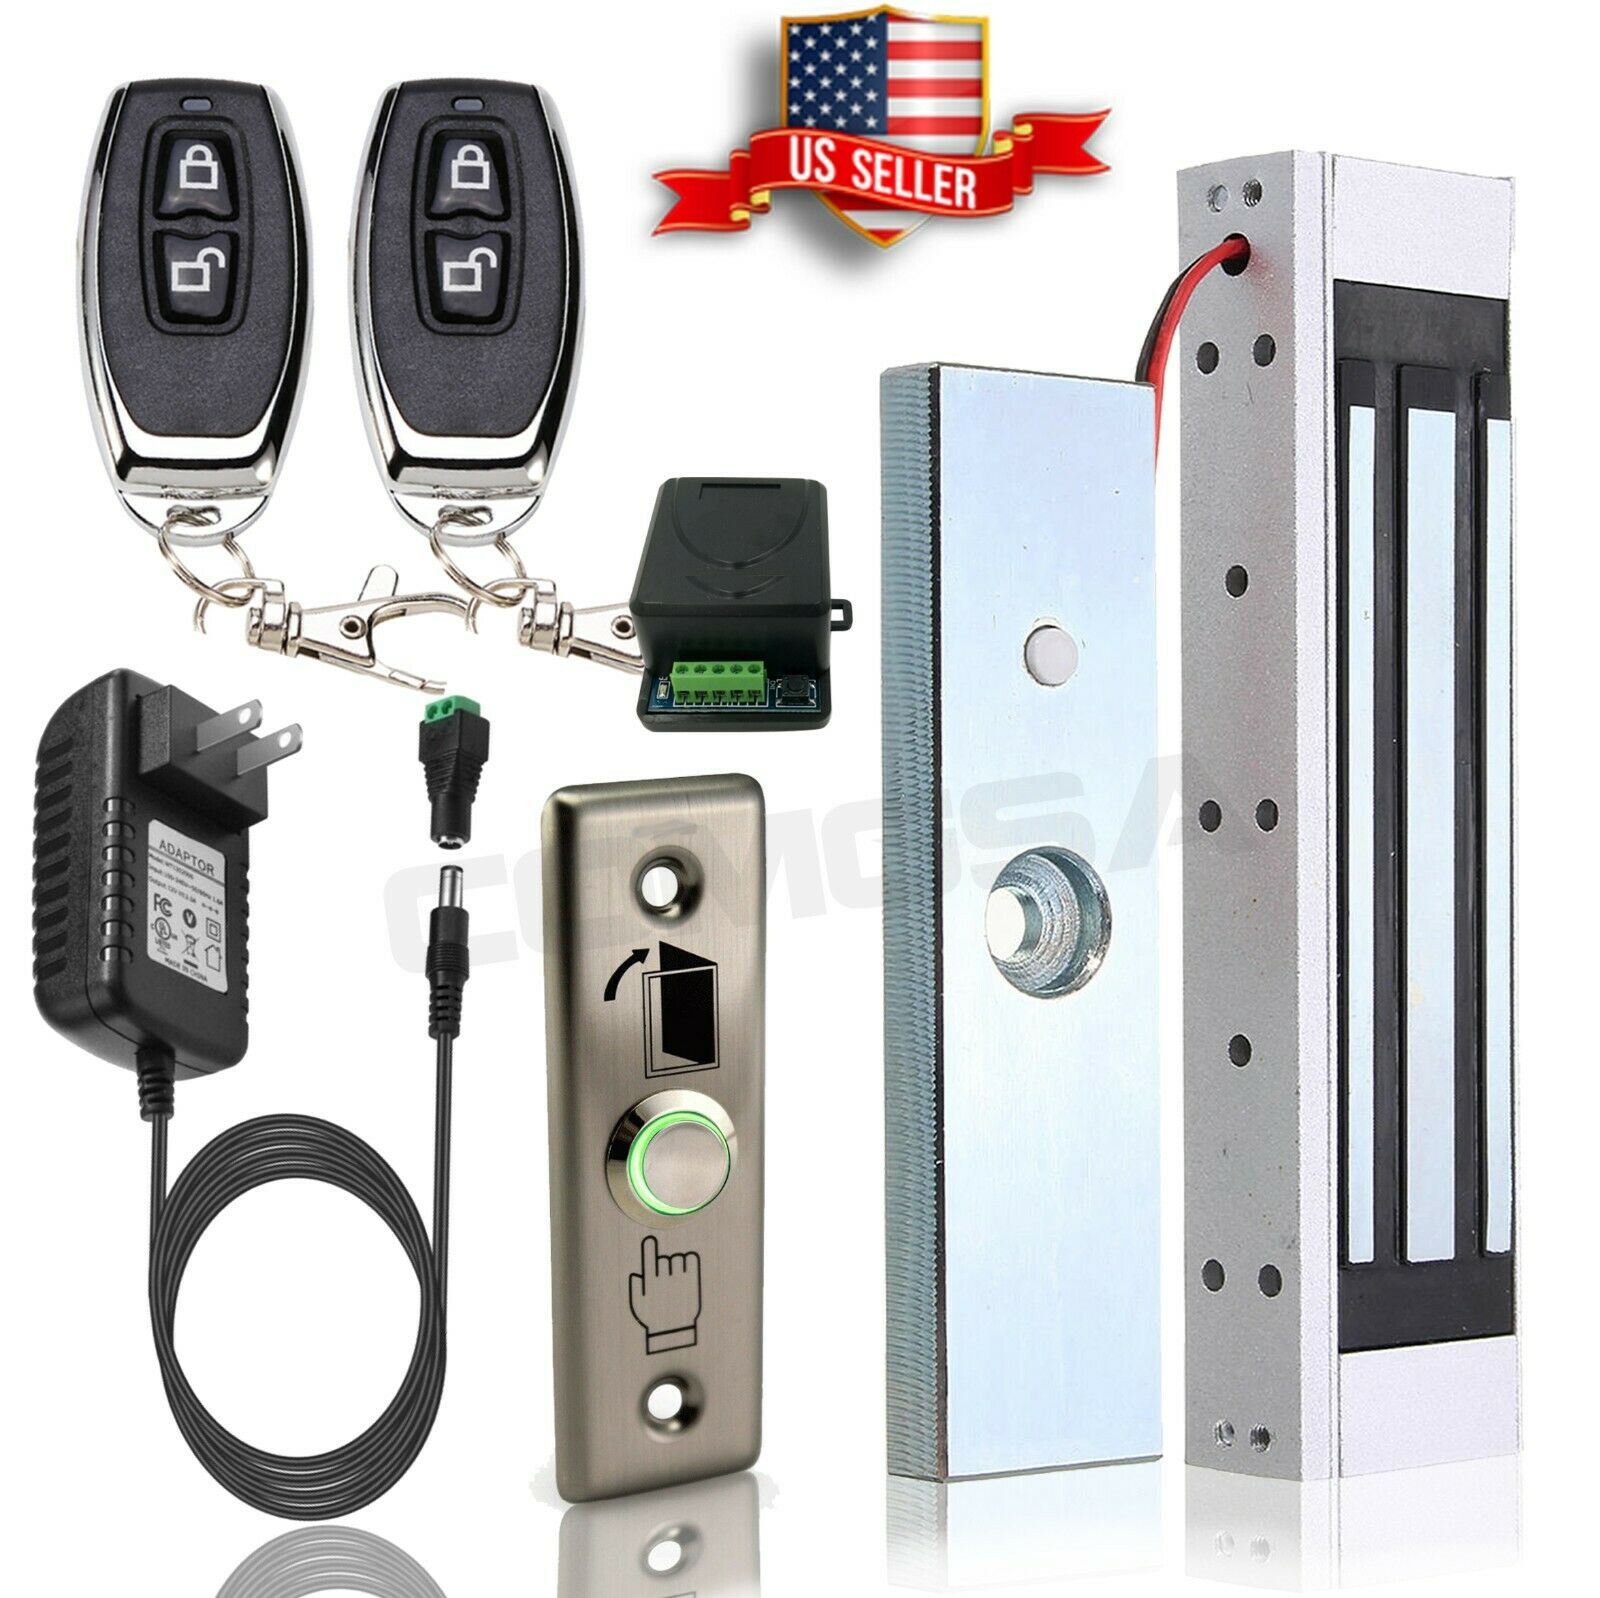 Door Access Control System, Electric Magnetic Lock, 2 Wireless Remote Controls